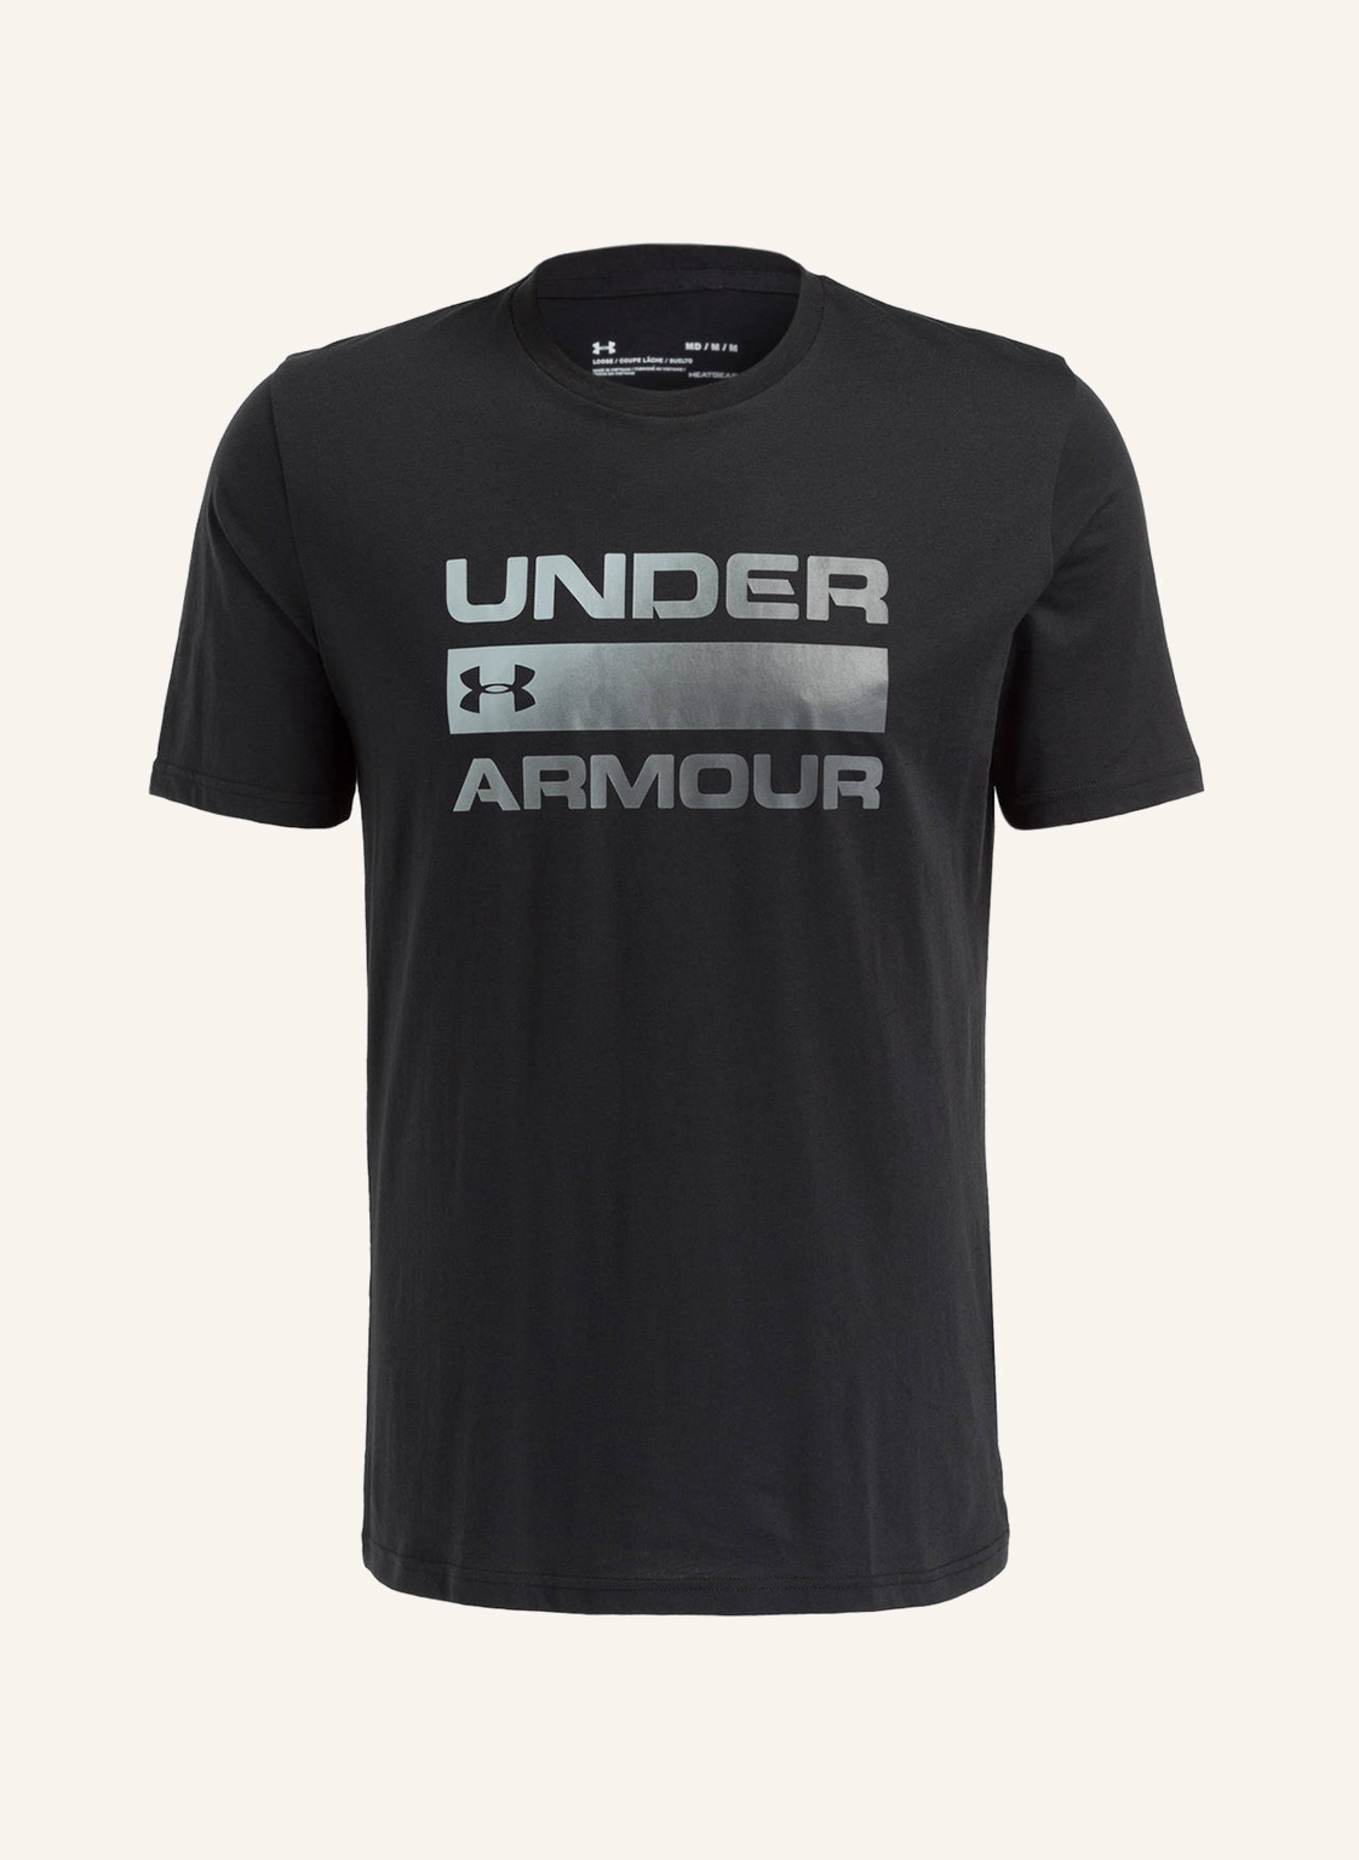 UNDER ARMOUR T-shirt TEAM ISSUE, Color: BLACK (Image 1)